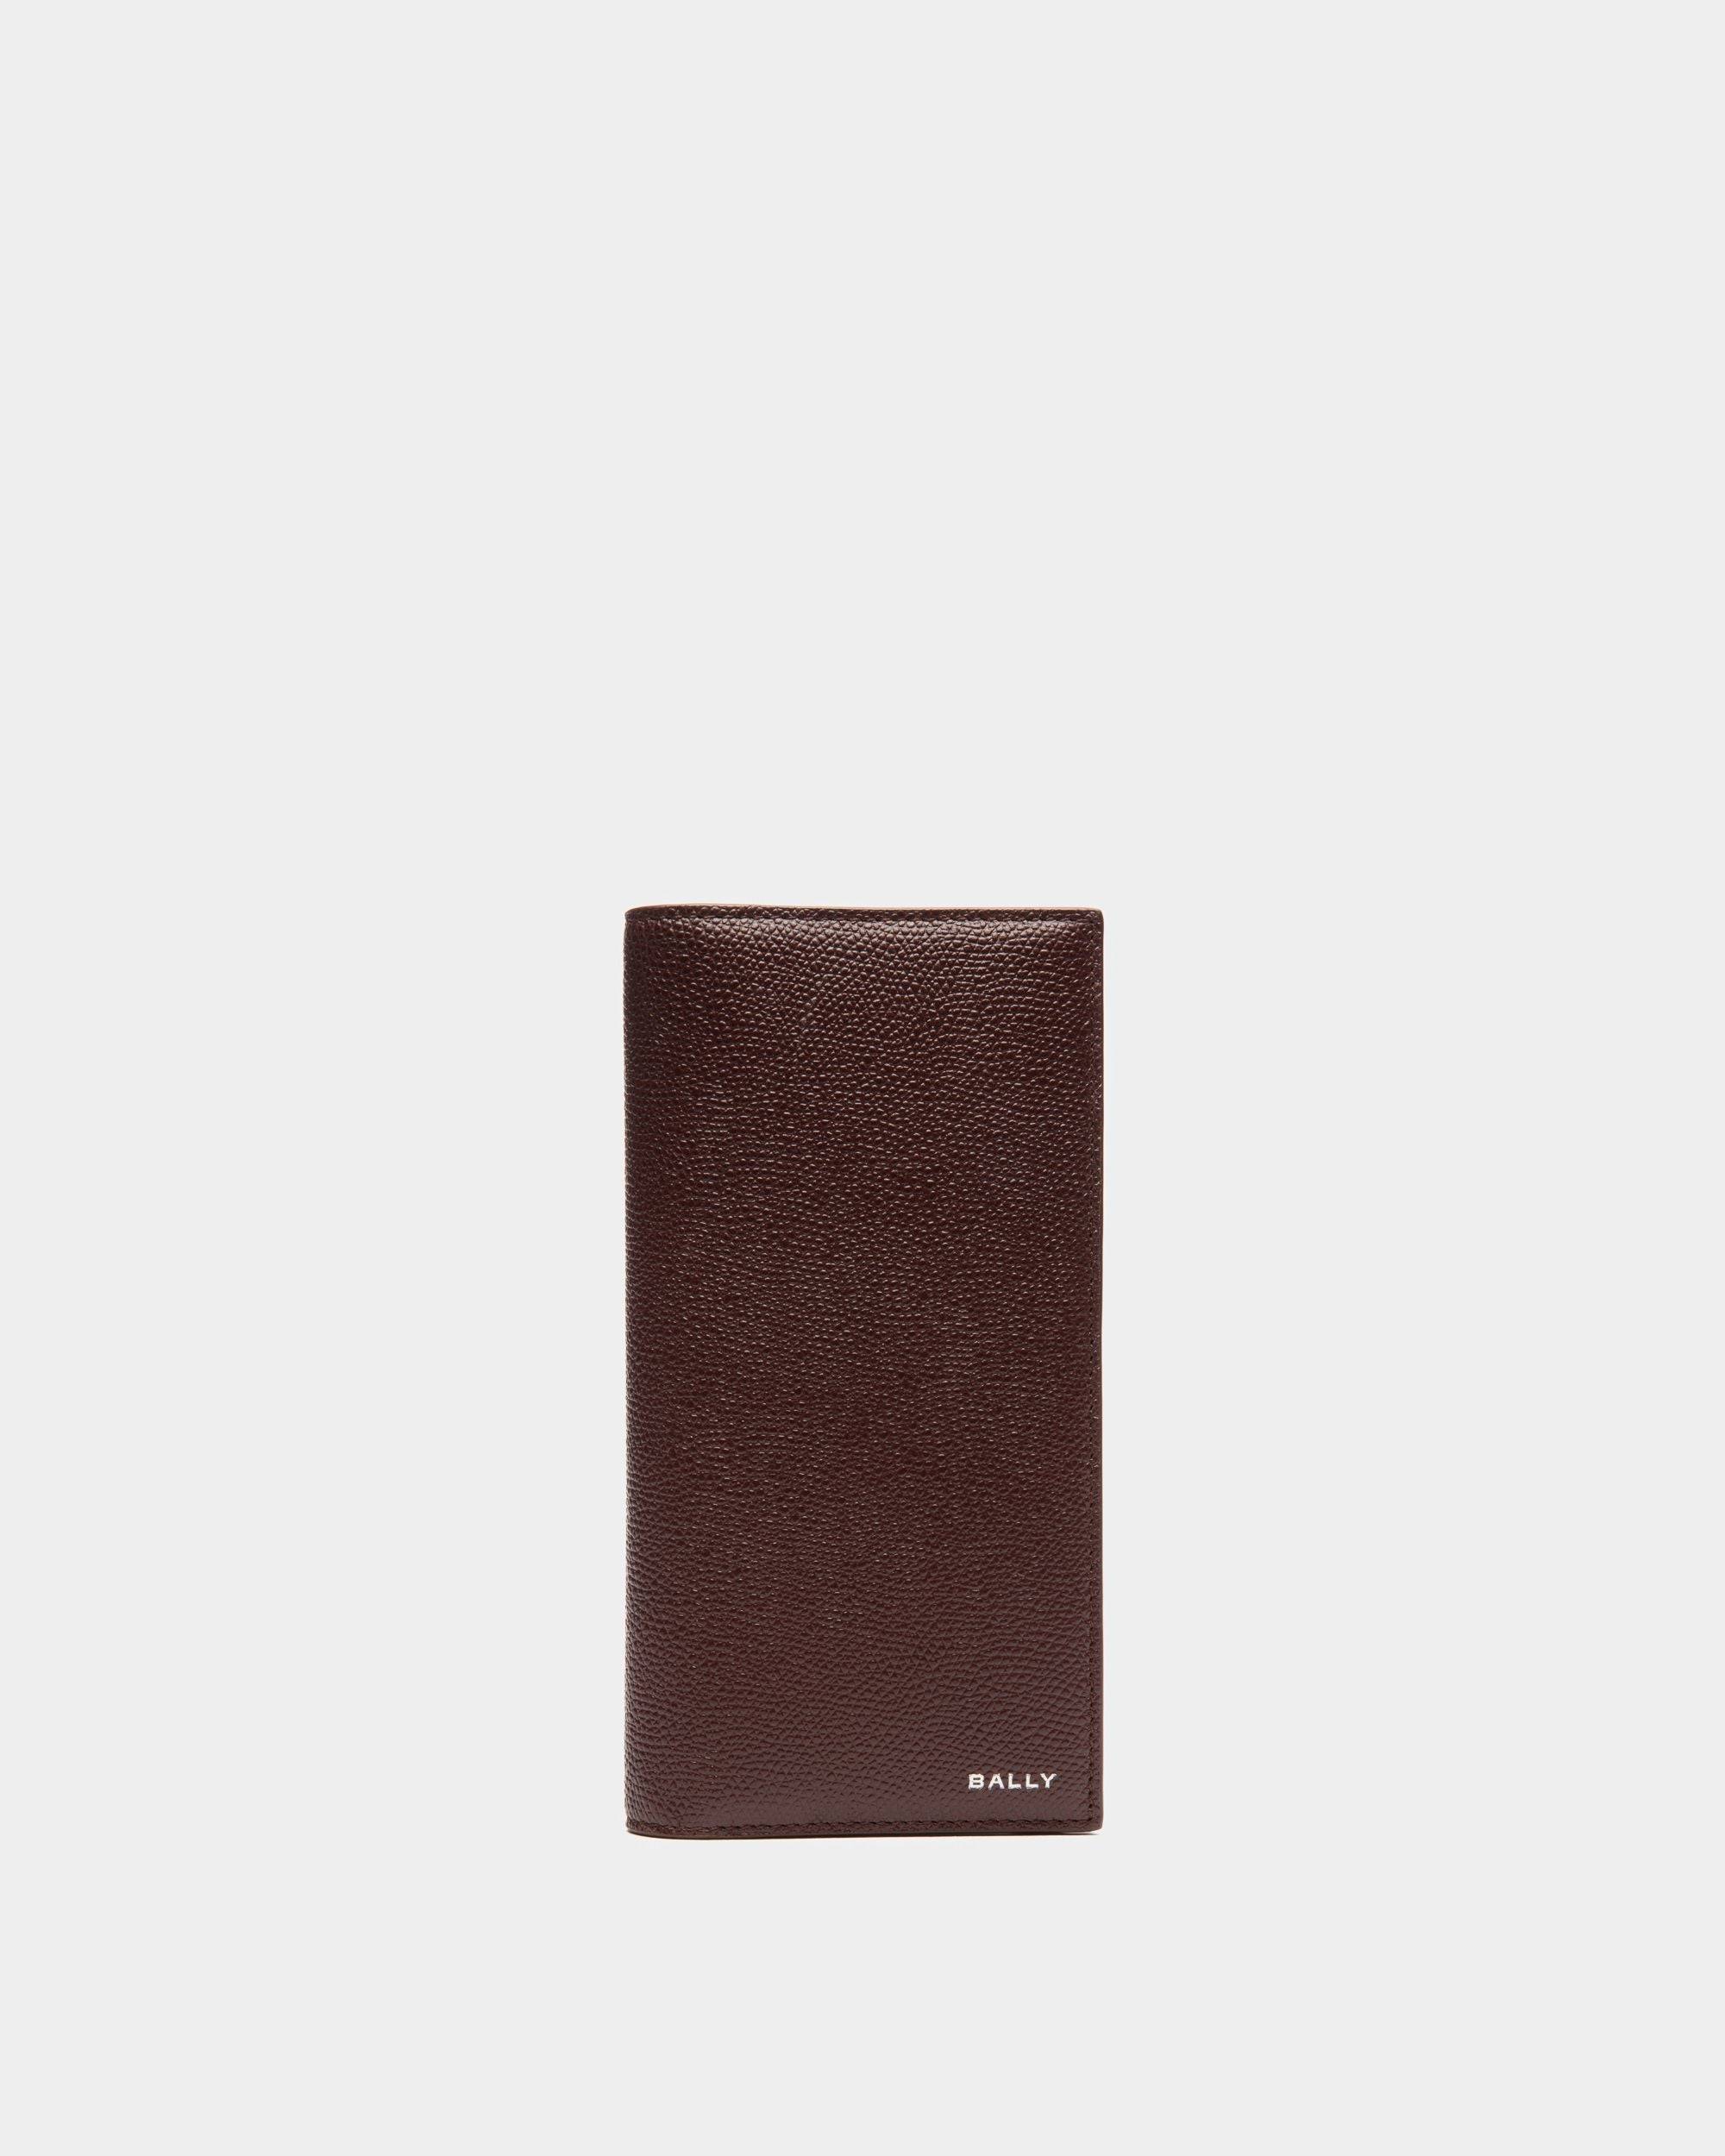 Flag | Men's Continental Wallet in Chestnut Brown Grained Leather | Bally | Still Life Front